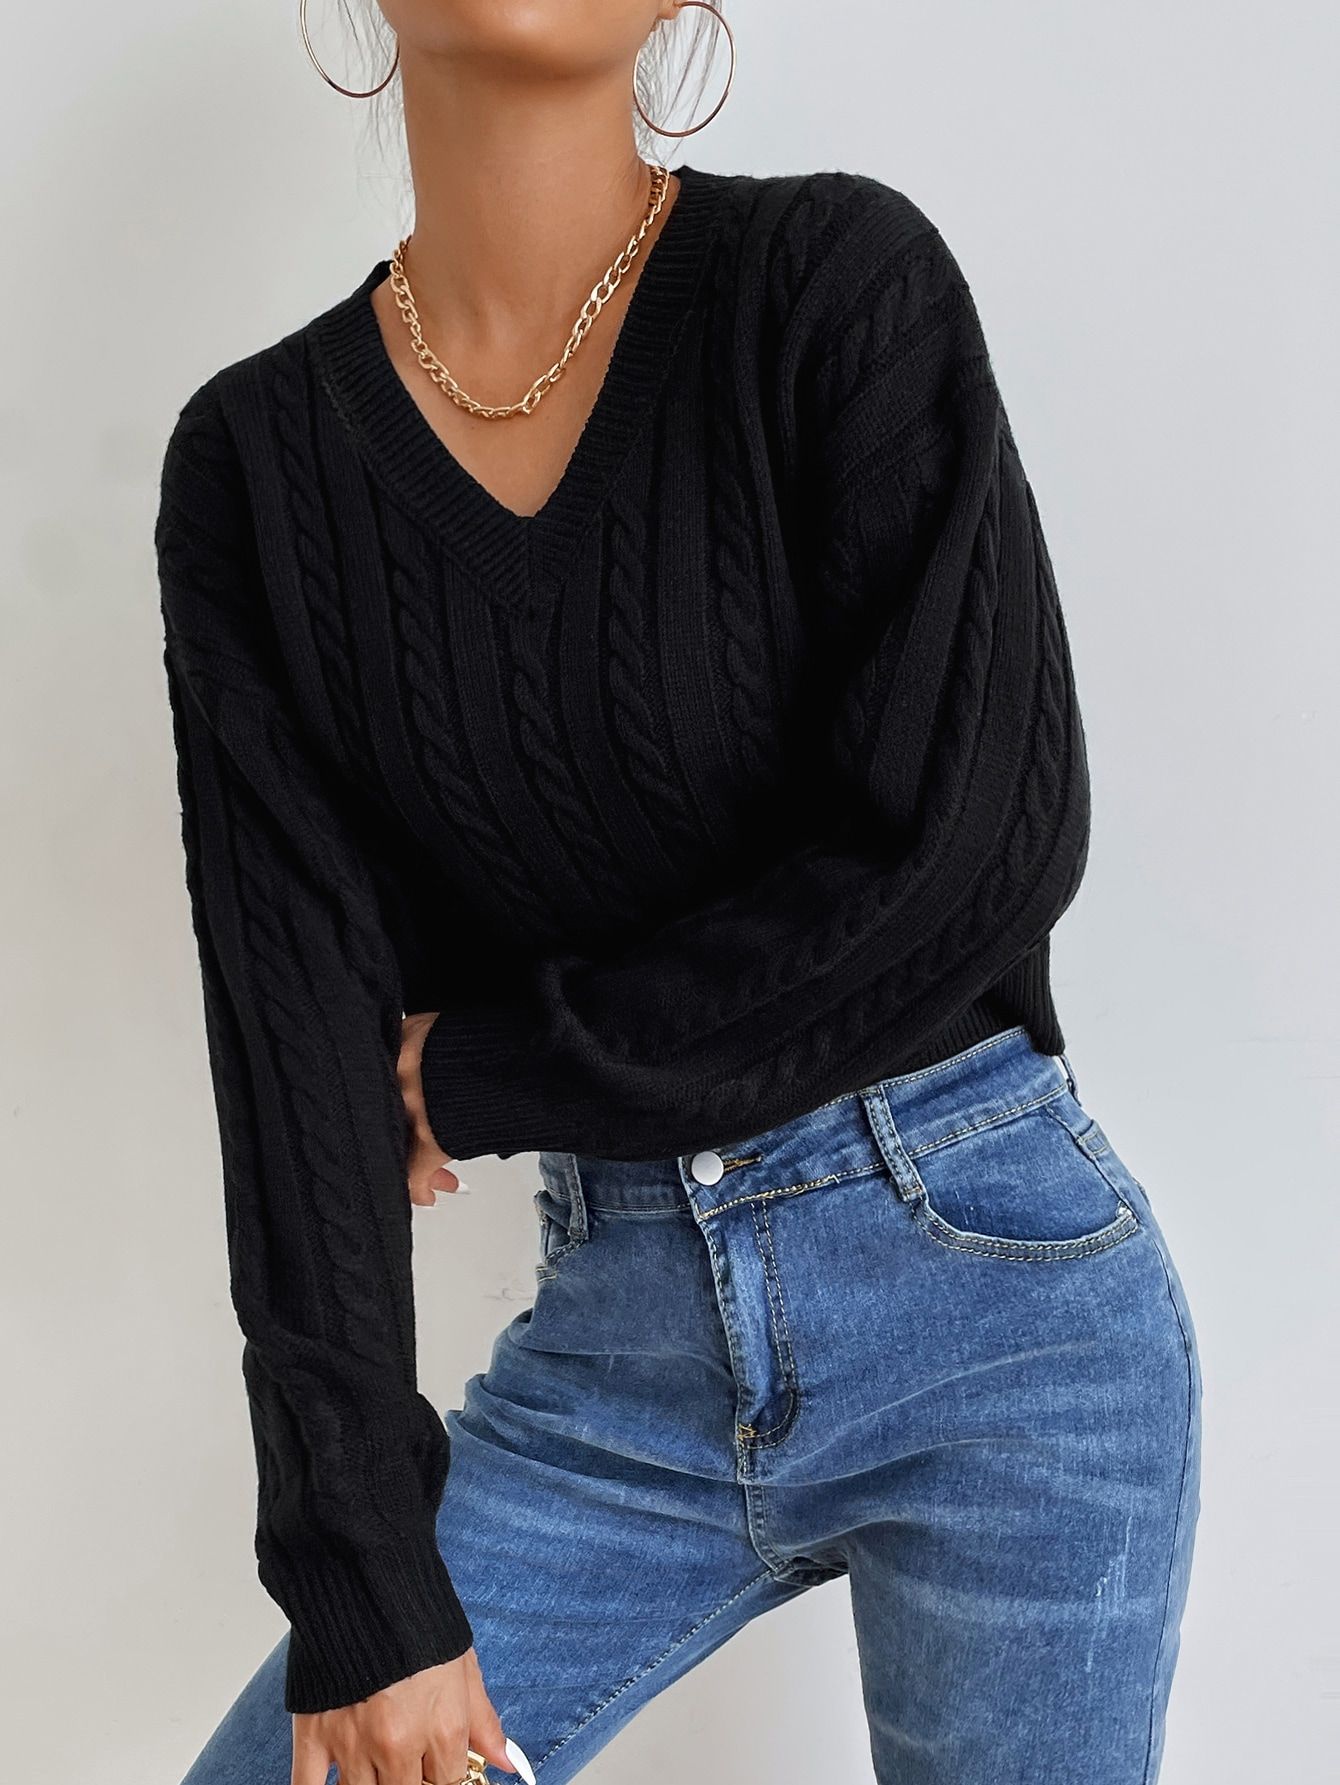 Best 15 Black V Neck Sweater Outfit Ideas: Style Guide